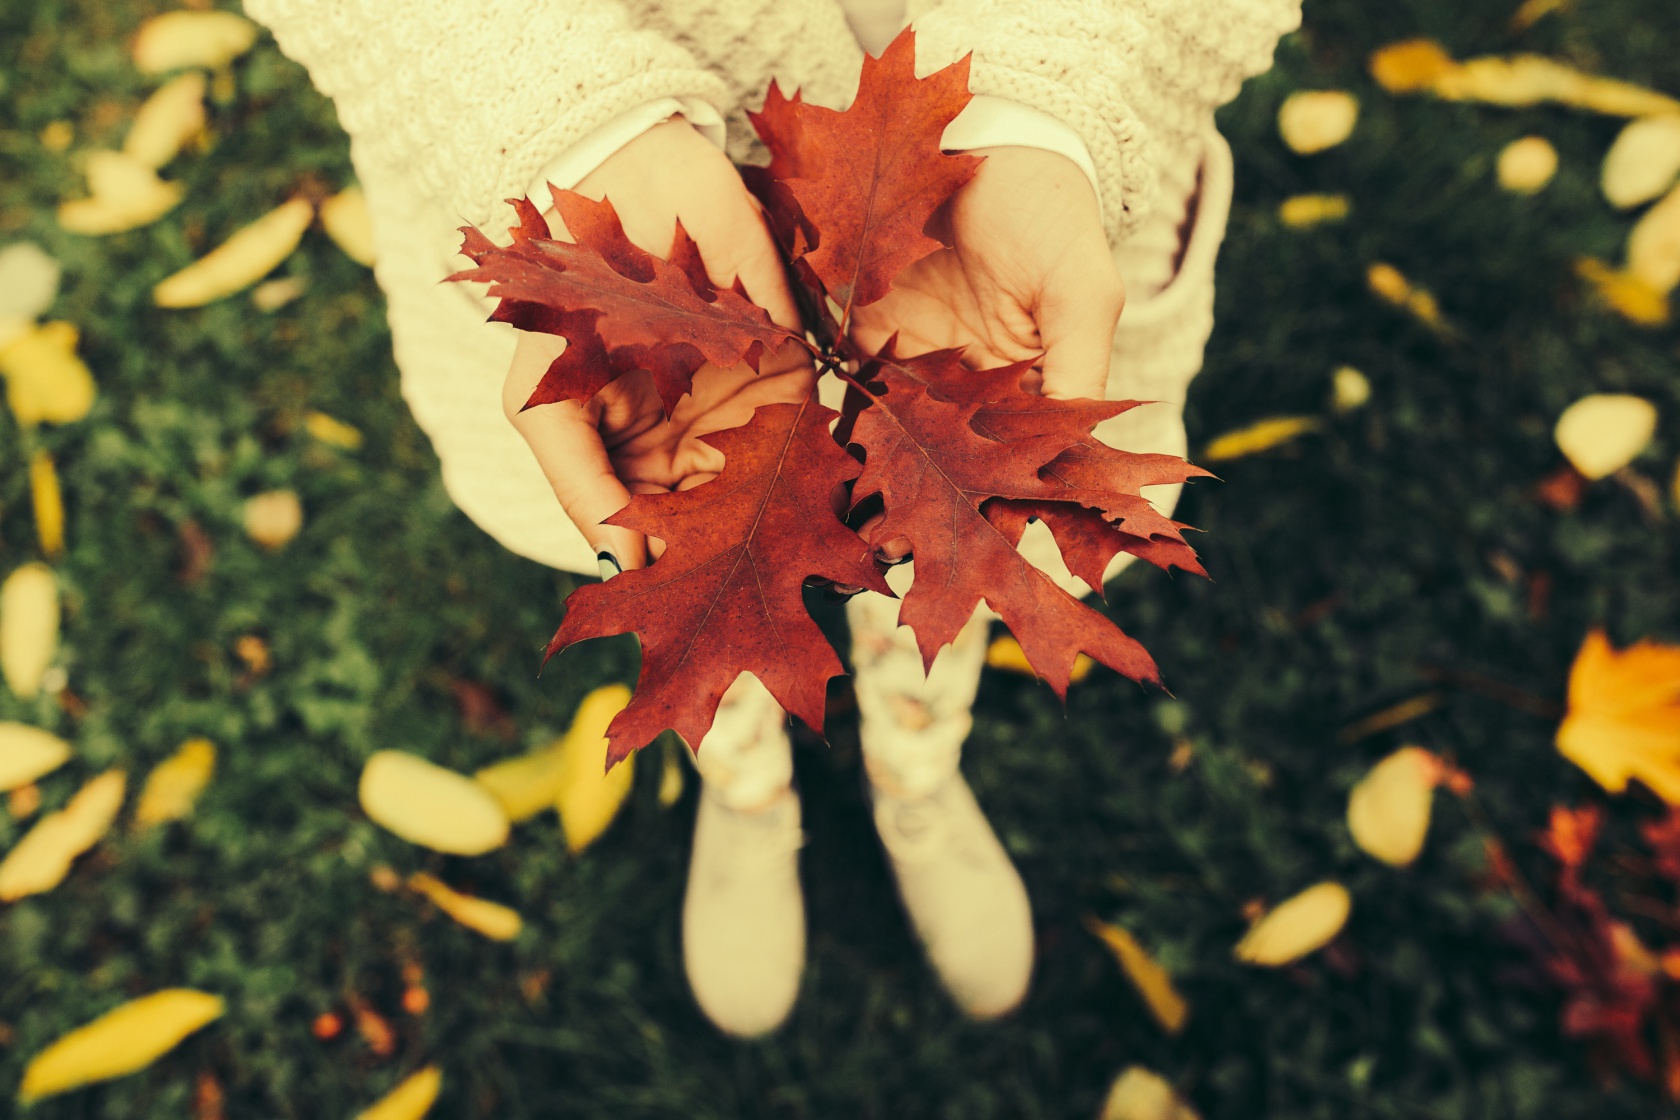 Holding autumn leaves